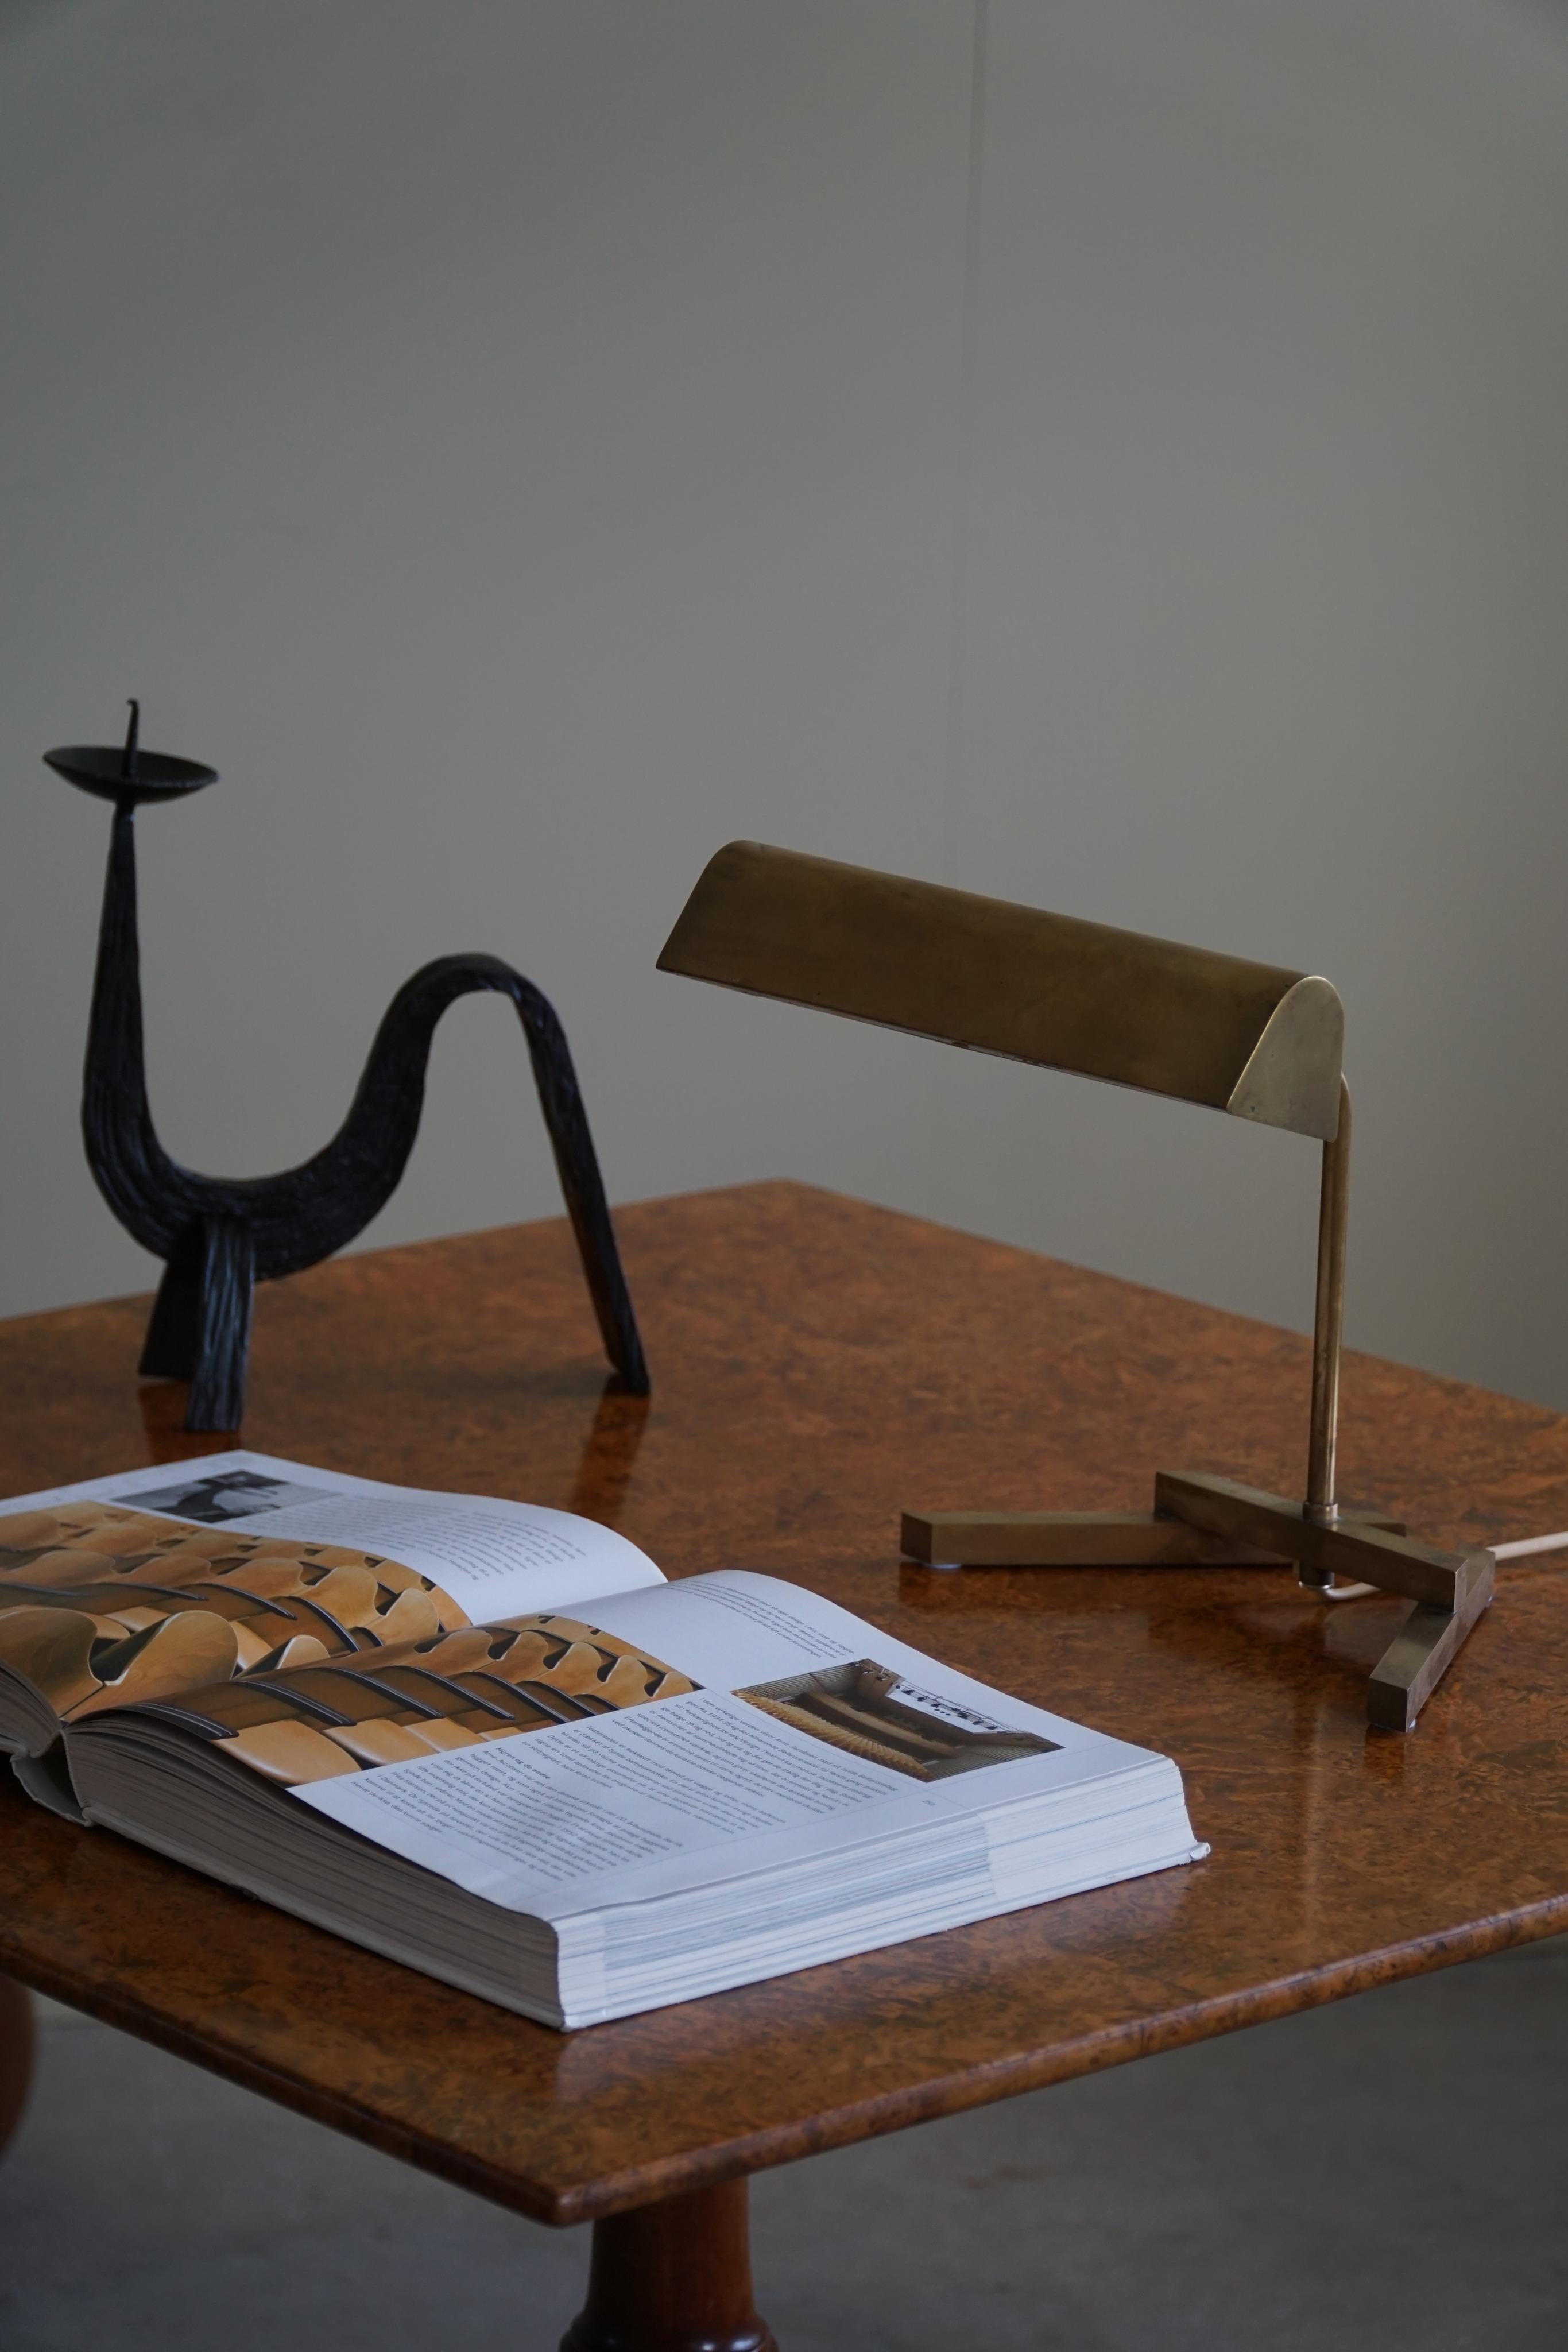 Elevate your interior décor with this stunning Danish Modern table lamp from the 1950s. Crafted with attention to detail, this geometric masterpiece in brass embodies the elegance and innovation of mid-century Danish design.
This table lamp